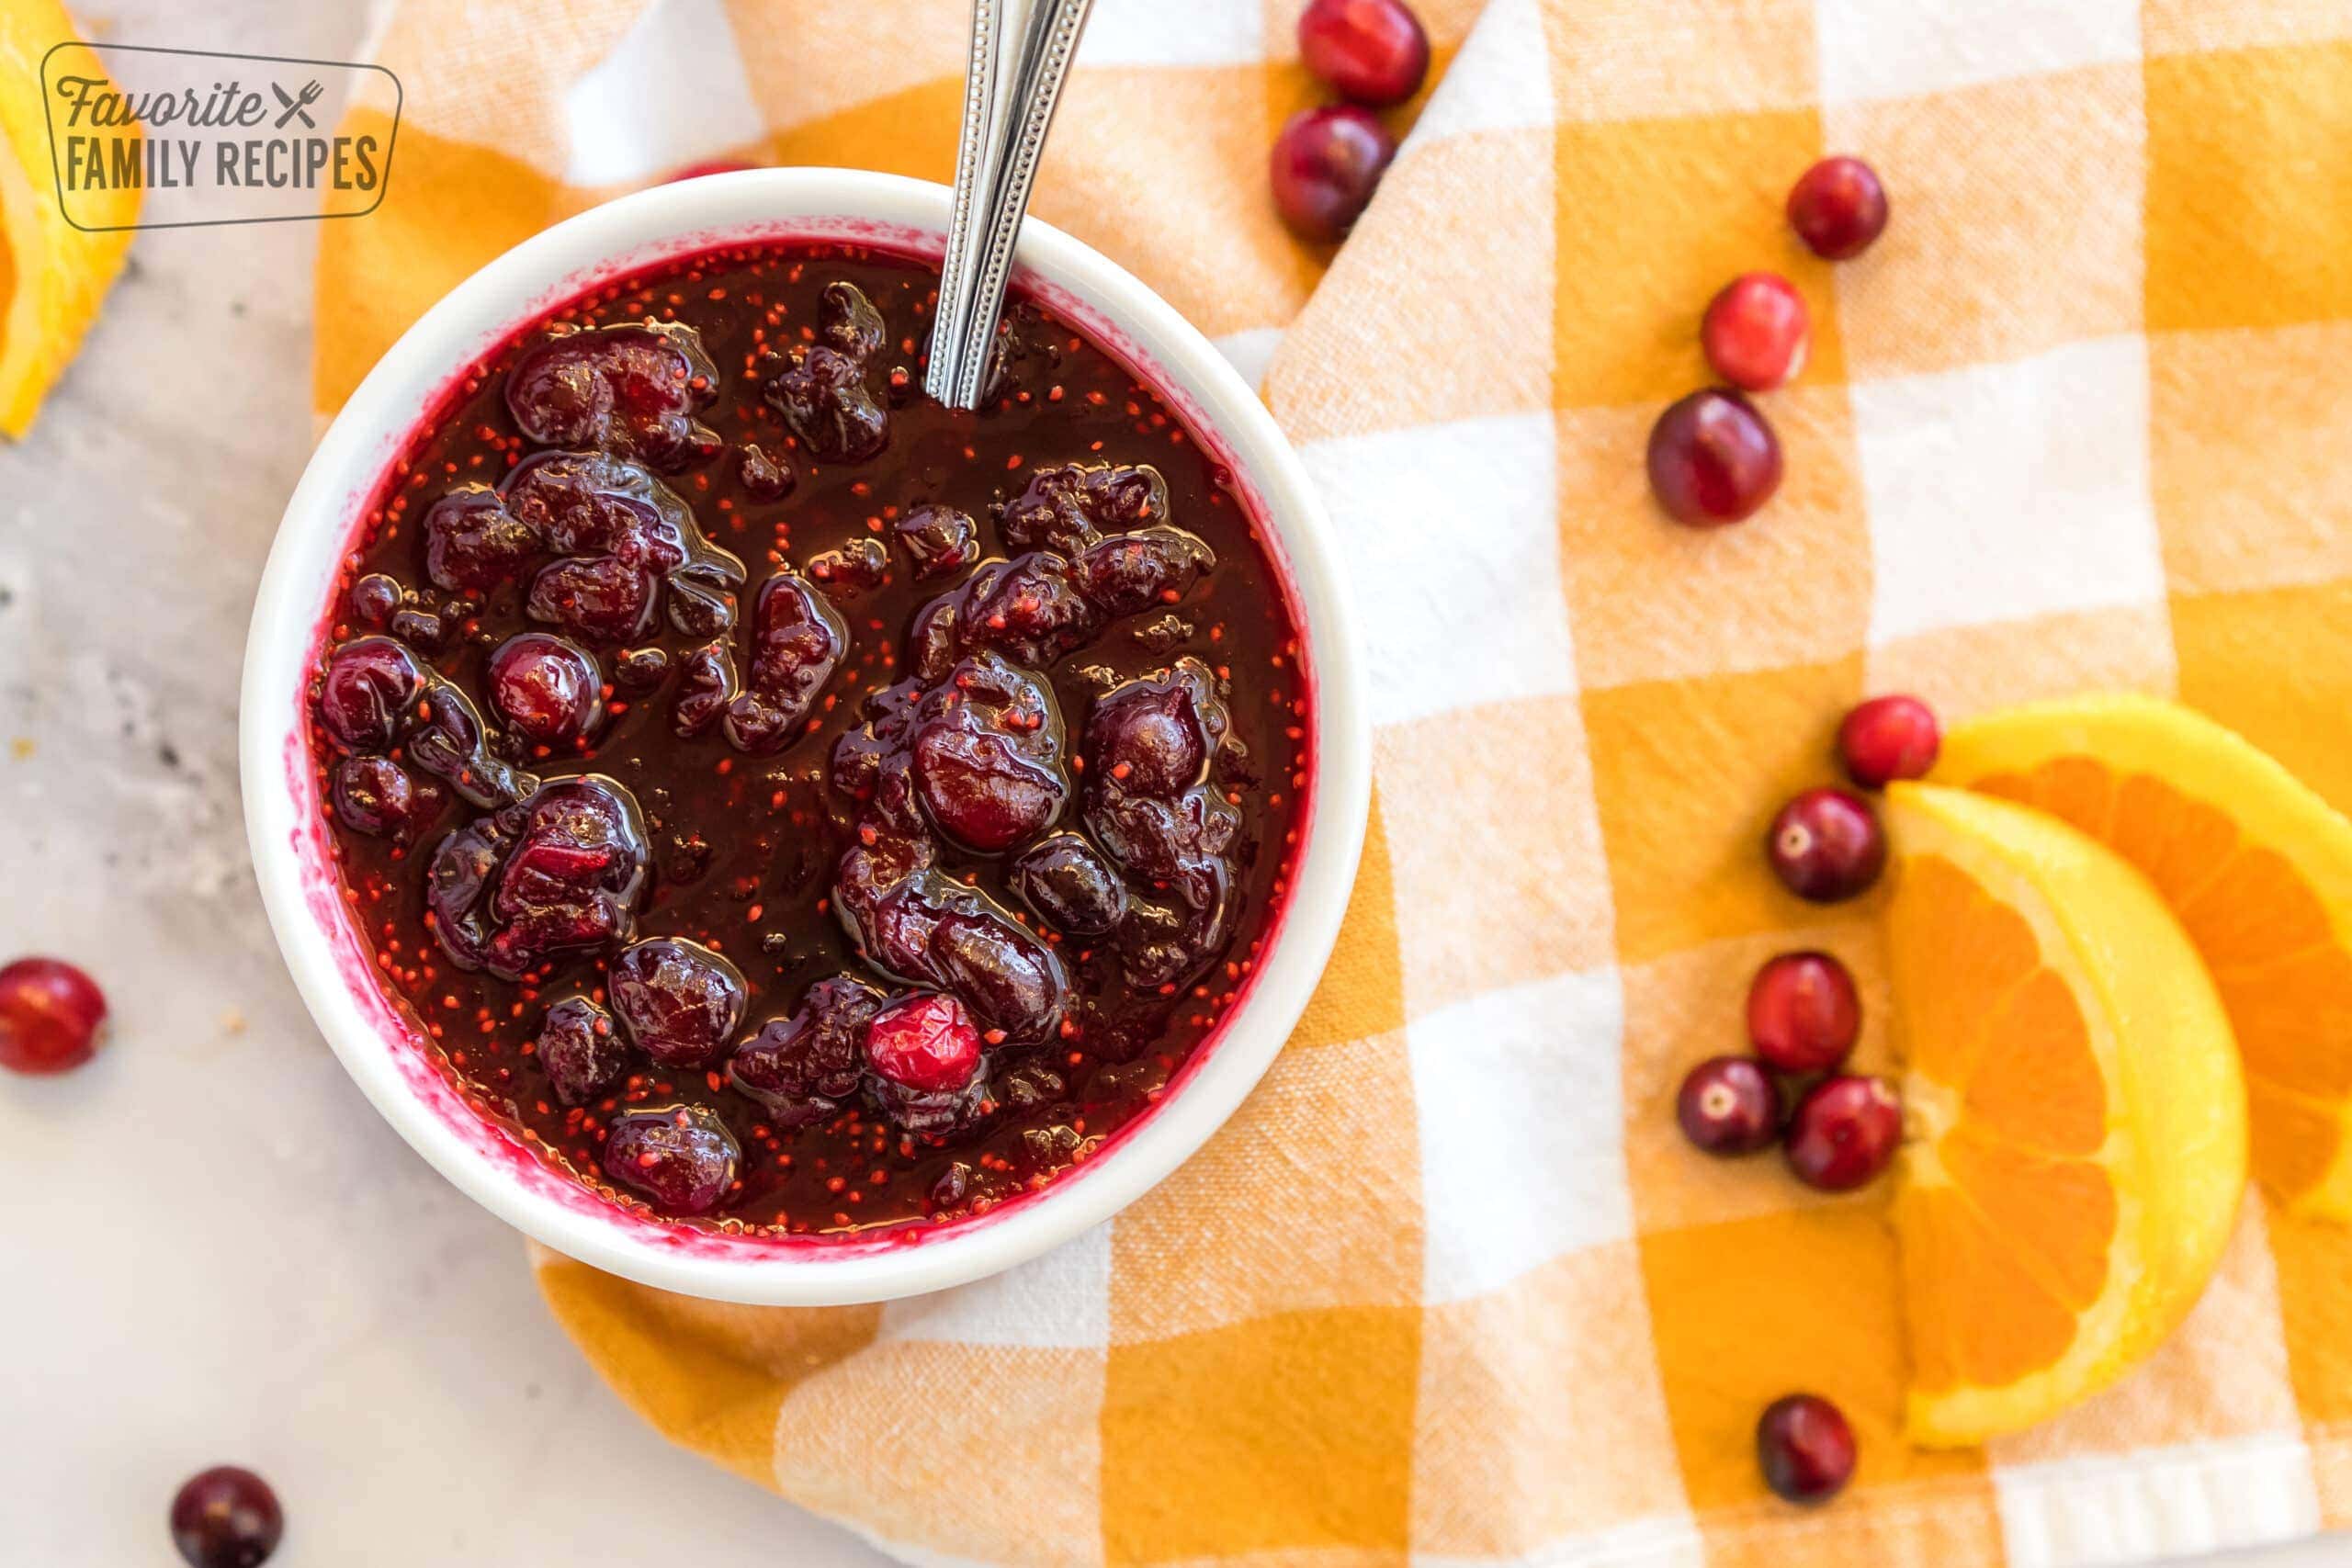 Cranberry orange sauce in a dish with fresh cranberries sprinkled on the side